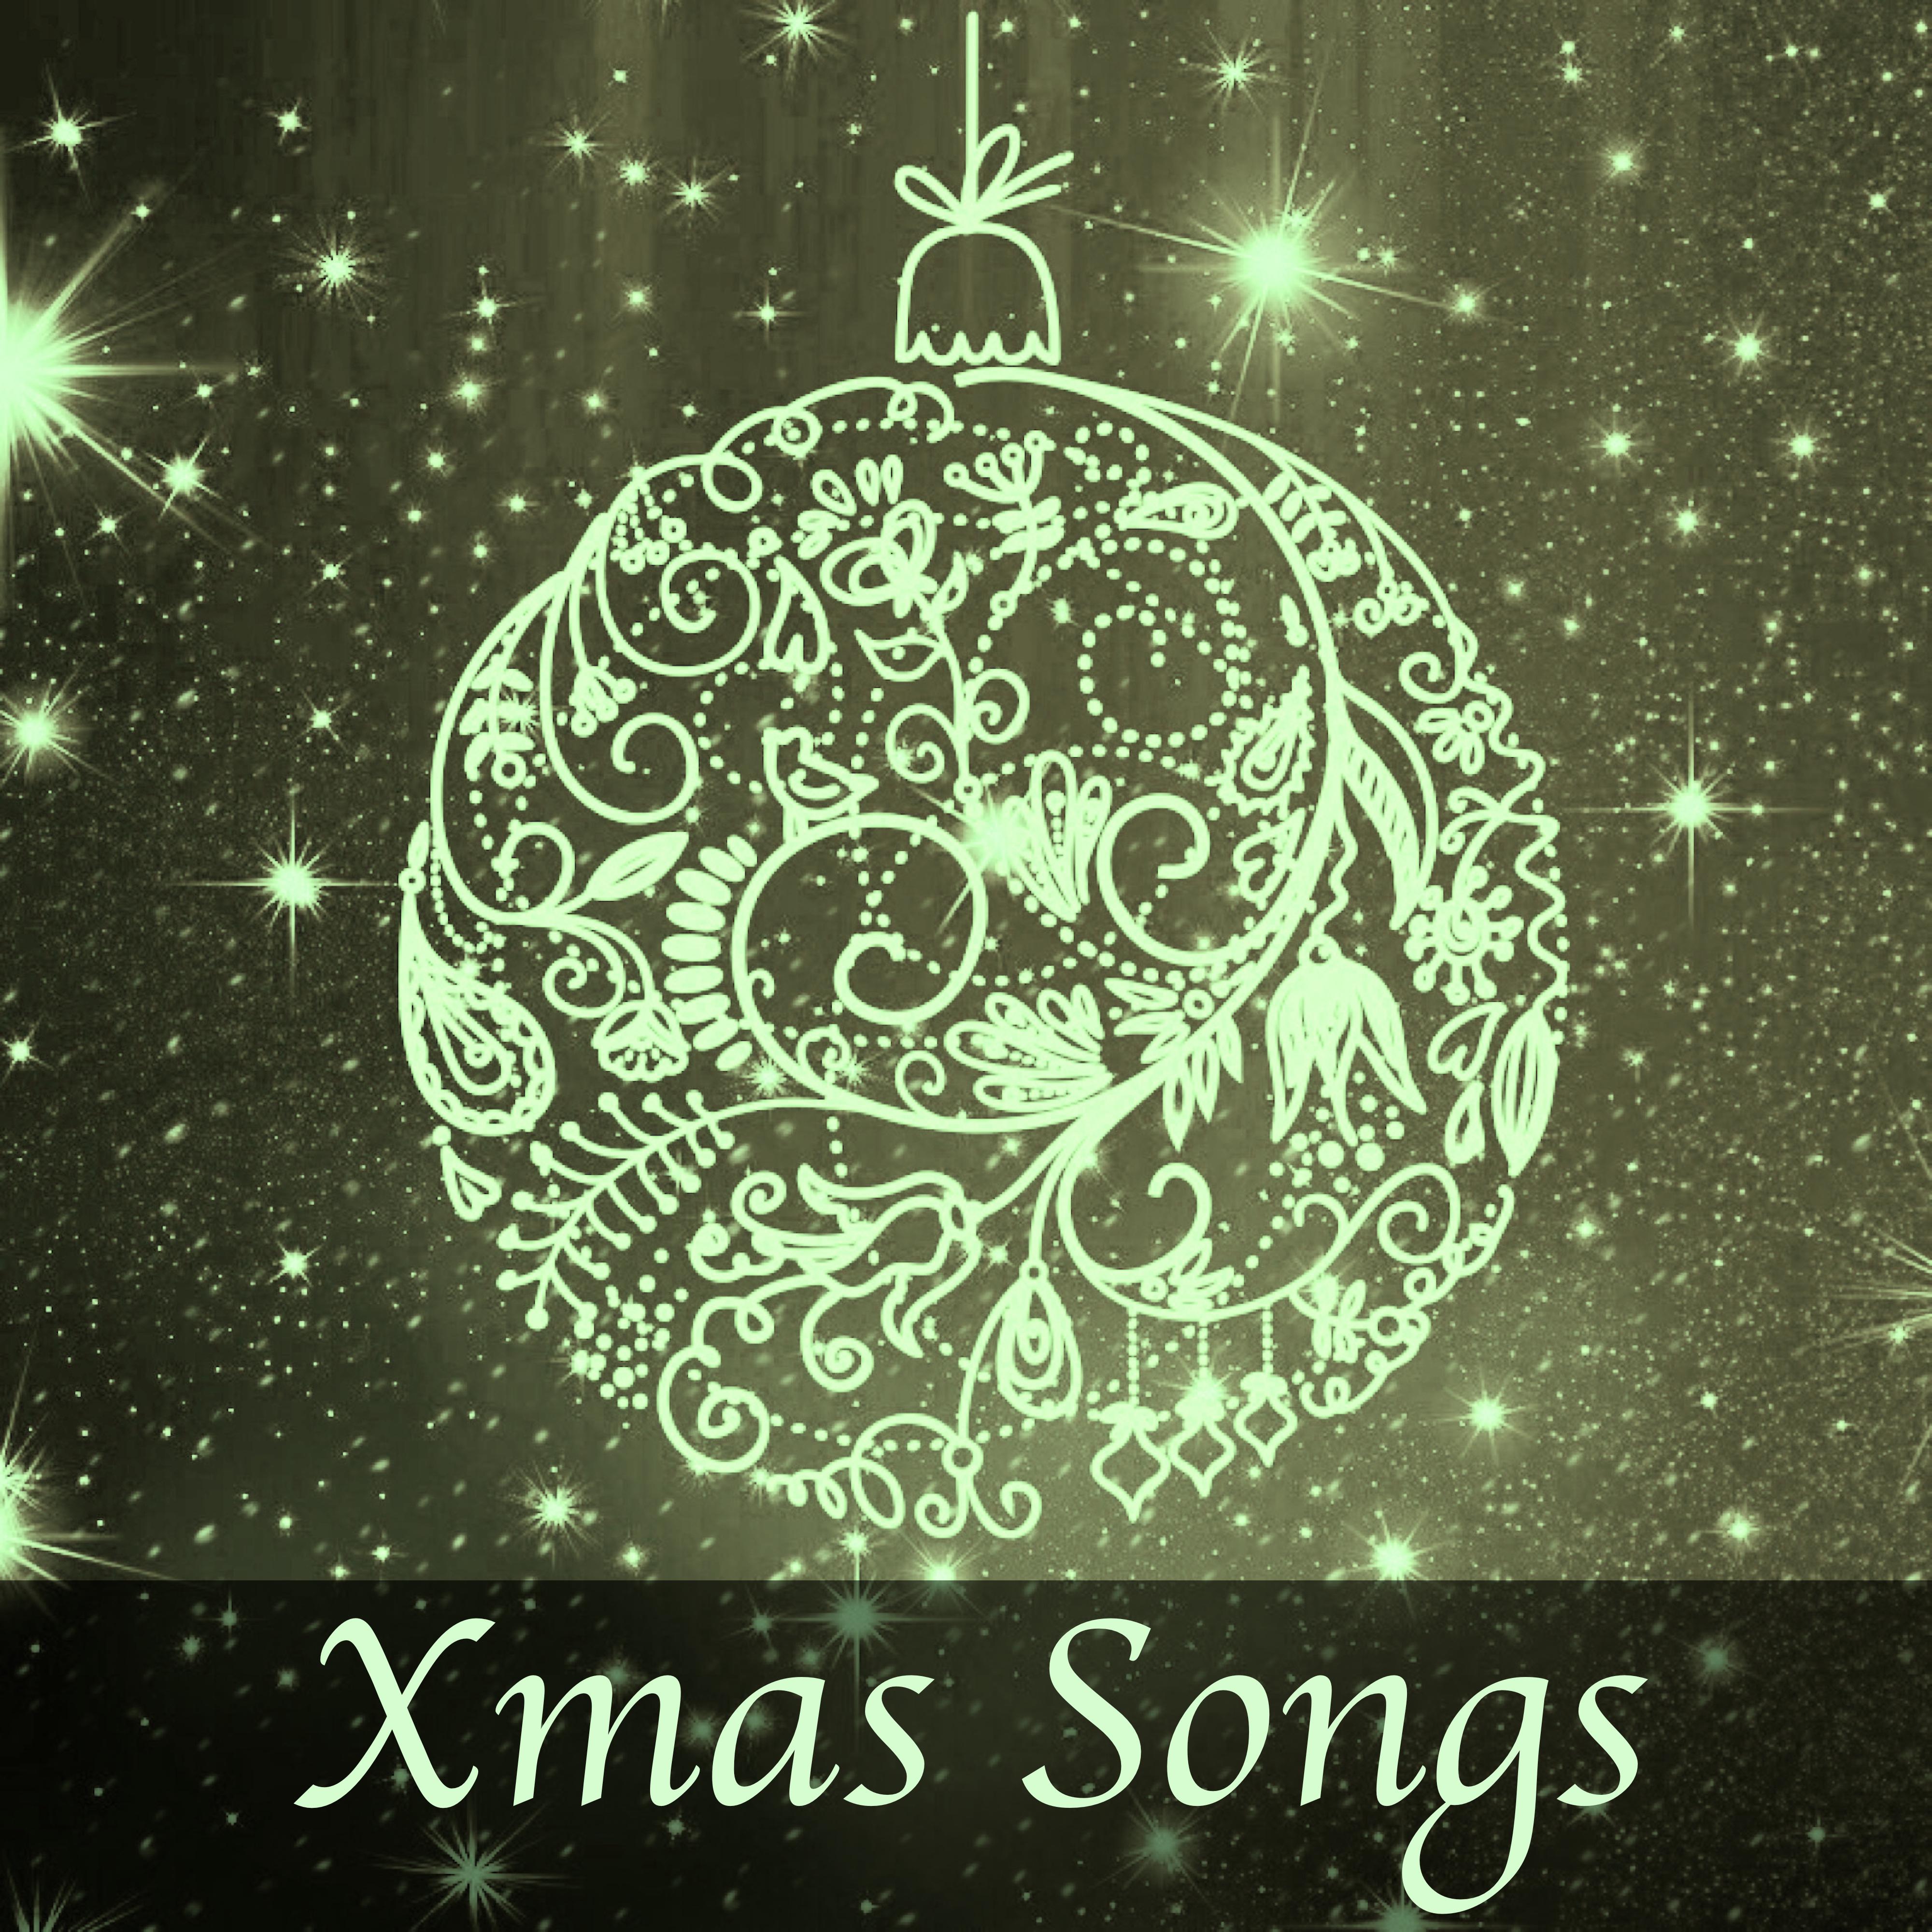 Xmas Songs - So This is Christmas: It's Time for Christmas Tree, Lights & Gifts